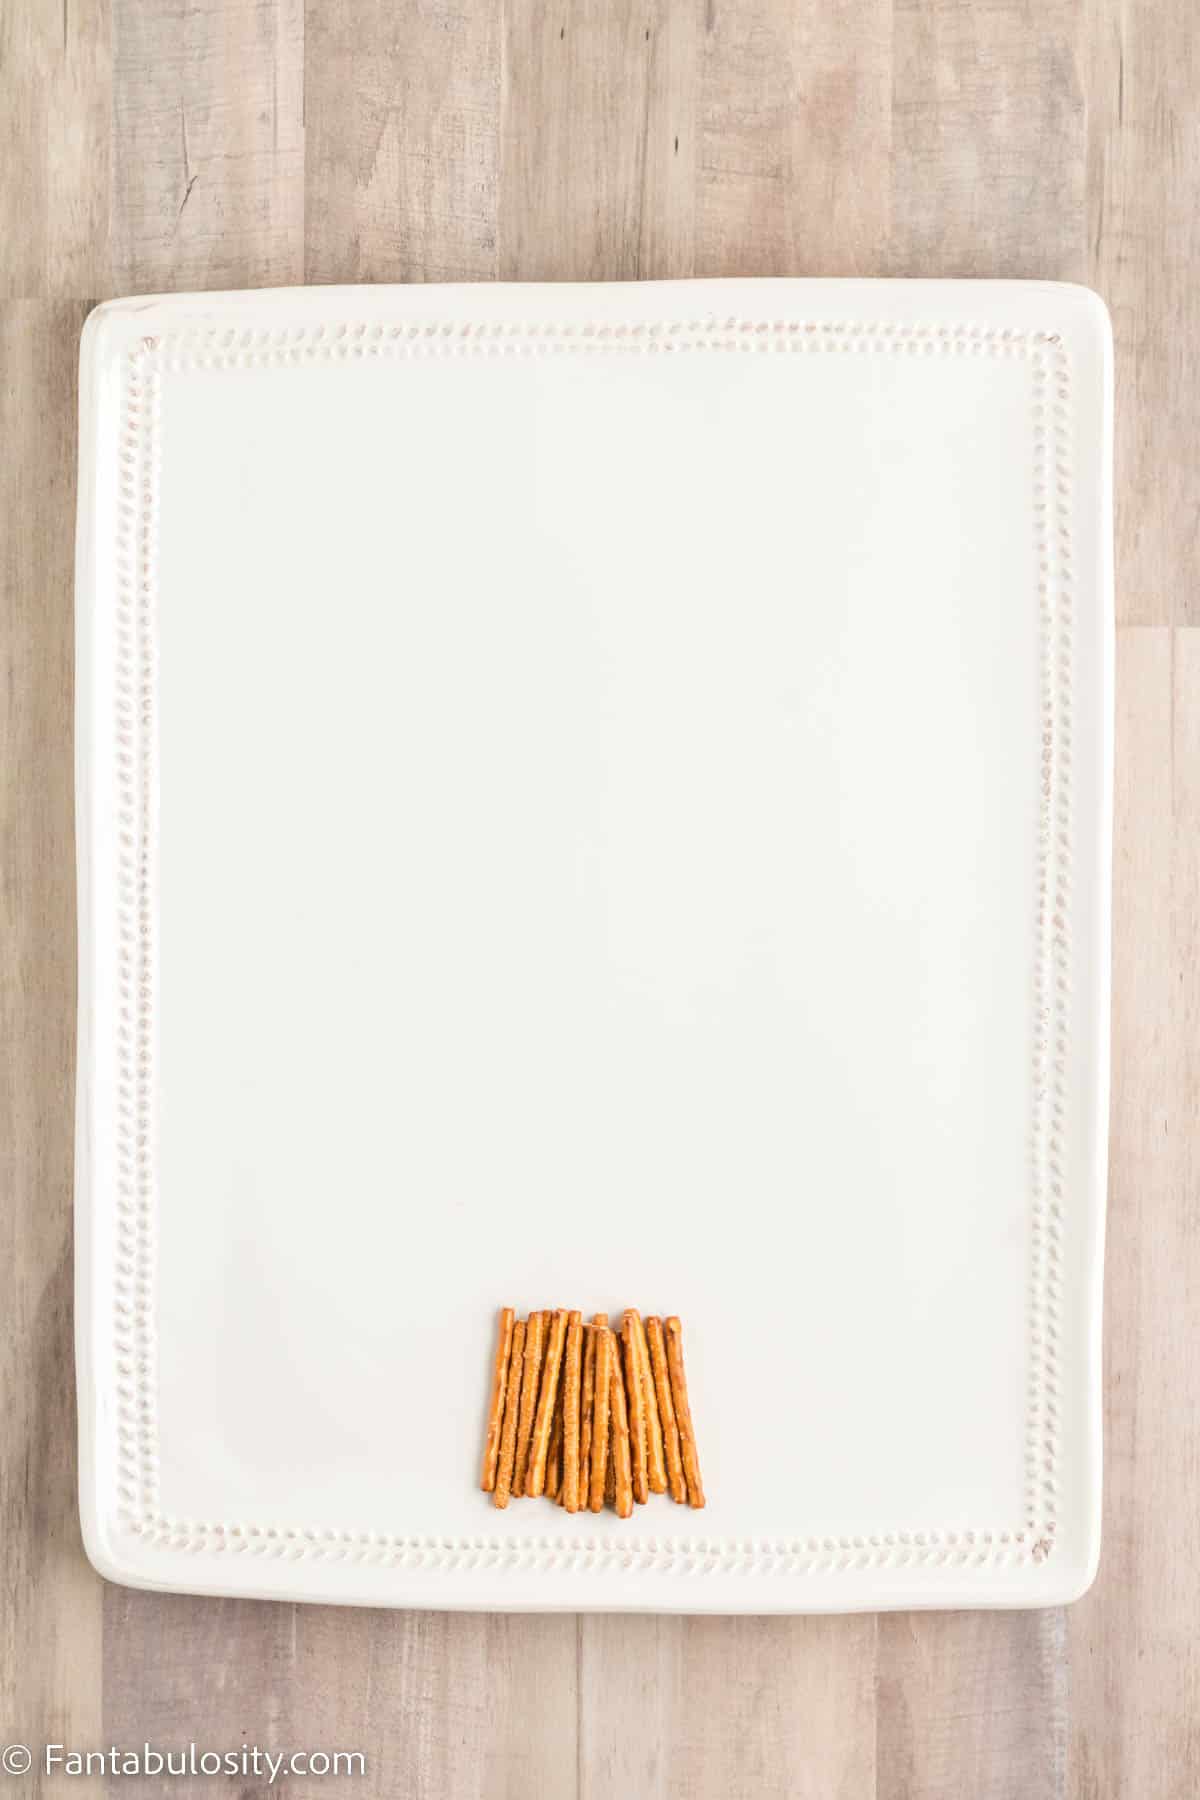 A large rectangular white platter has pretzel sticks together forming the trunk of a Christmas tree charcuterie board